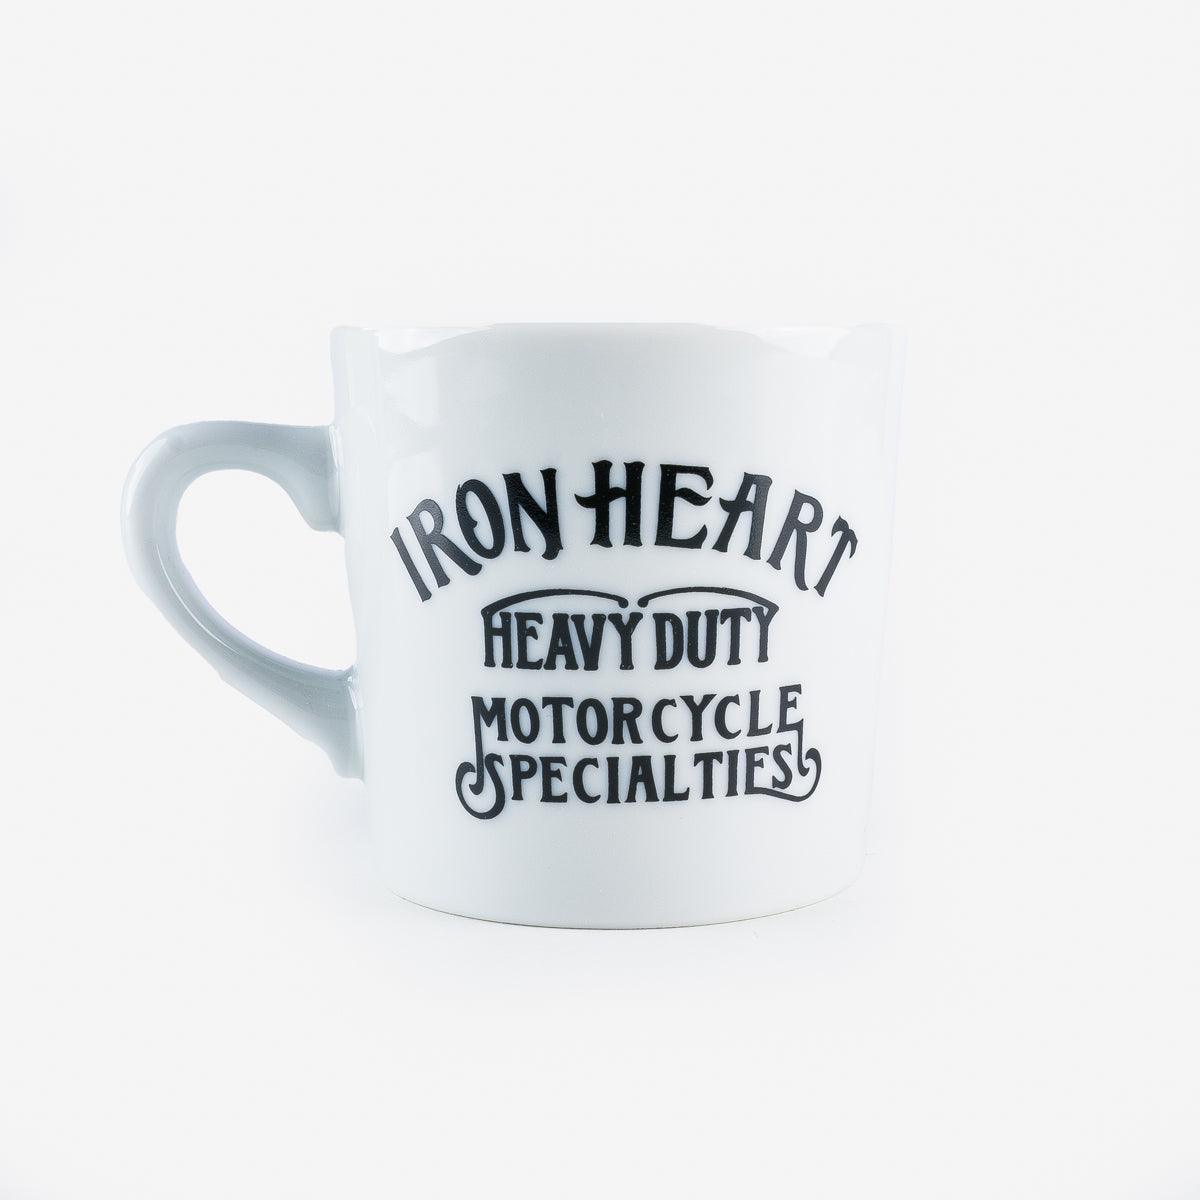 Image showing the IHG-112-HD - Iron Heart "Heavy Duty" coffee Mug which is a Others described by the following info Accessories, Iron Heart, New, Others, Released and sold on the IRON HEART GERMANY online store